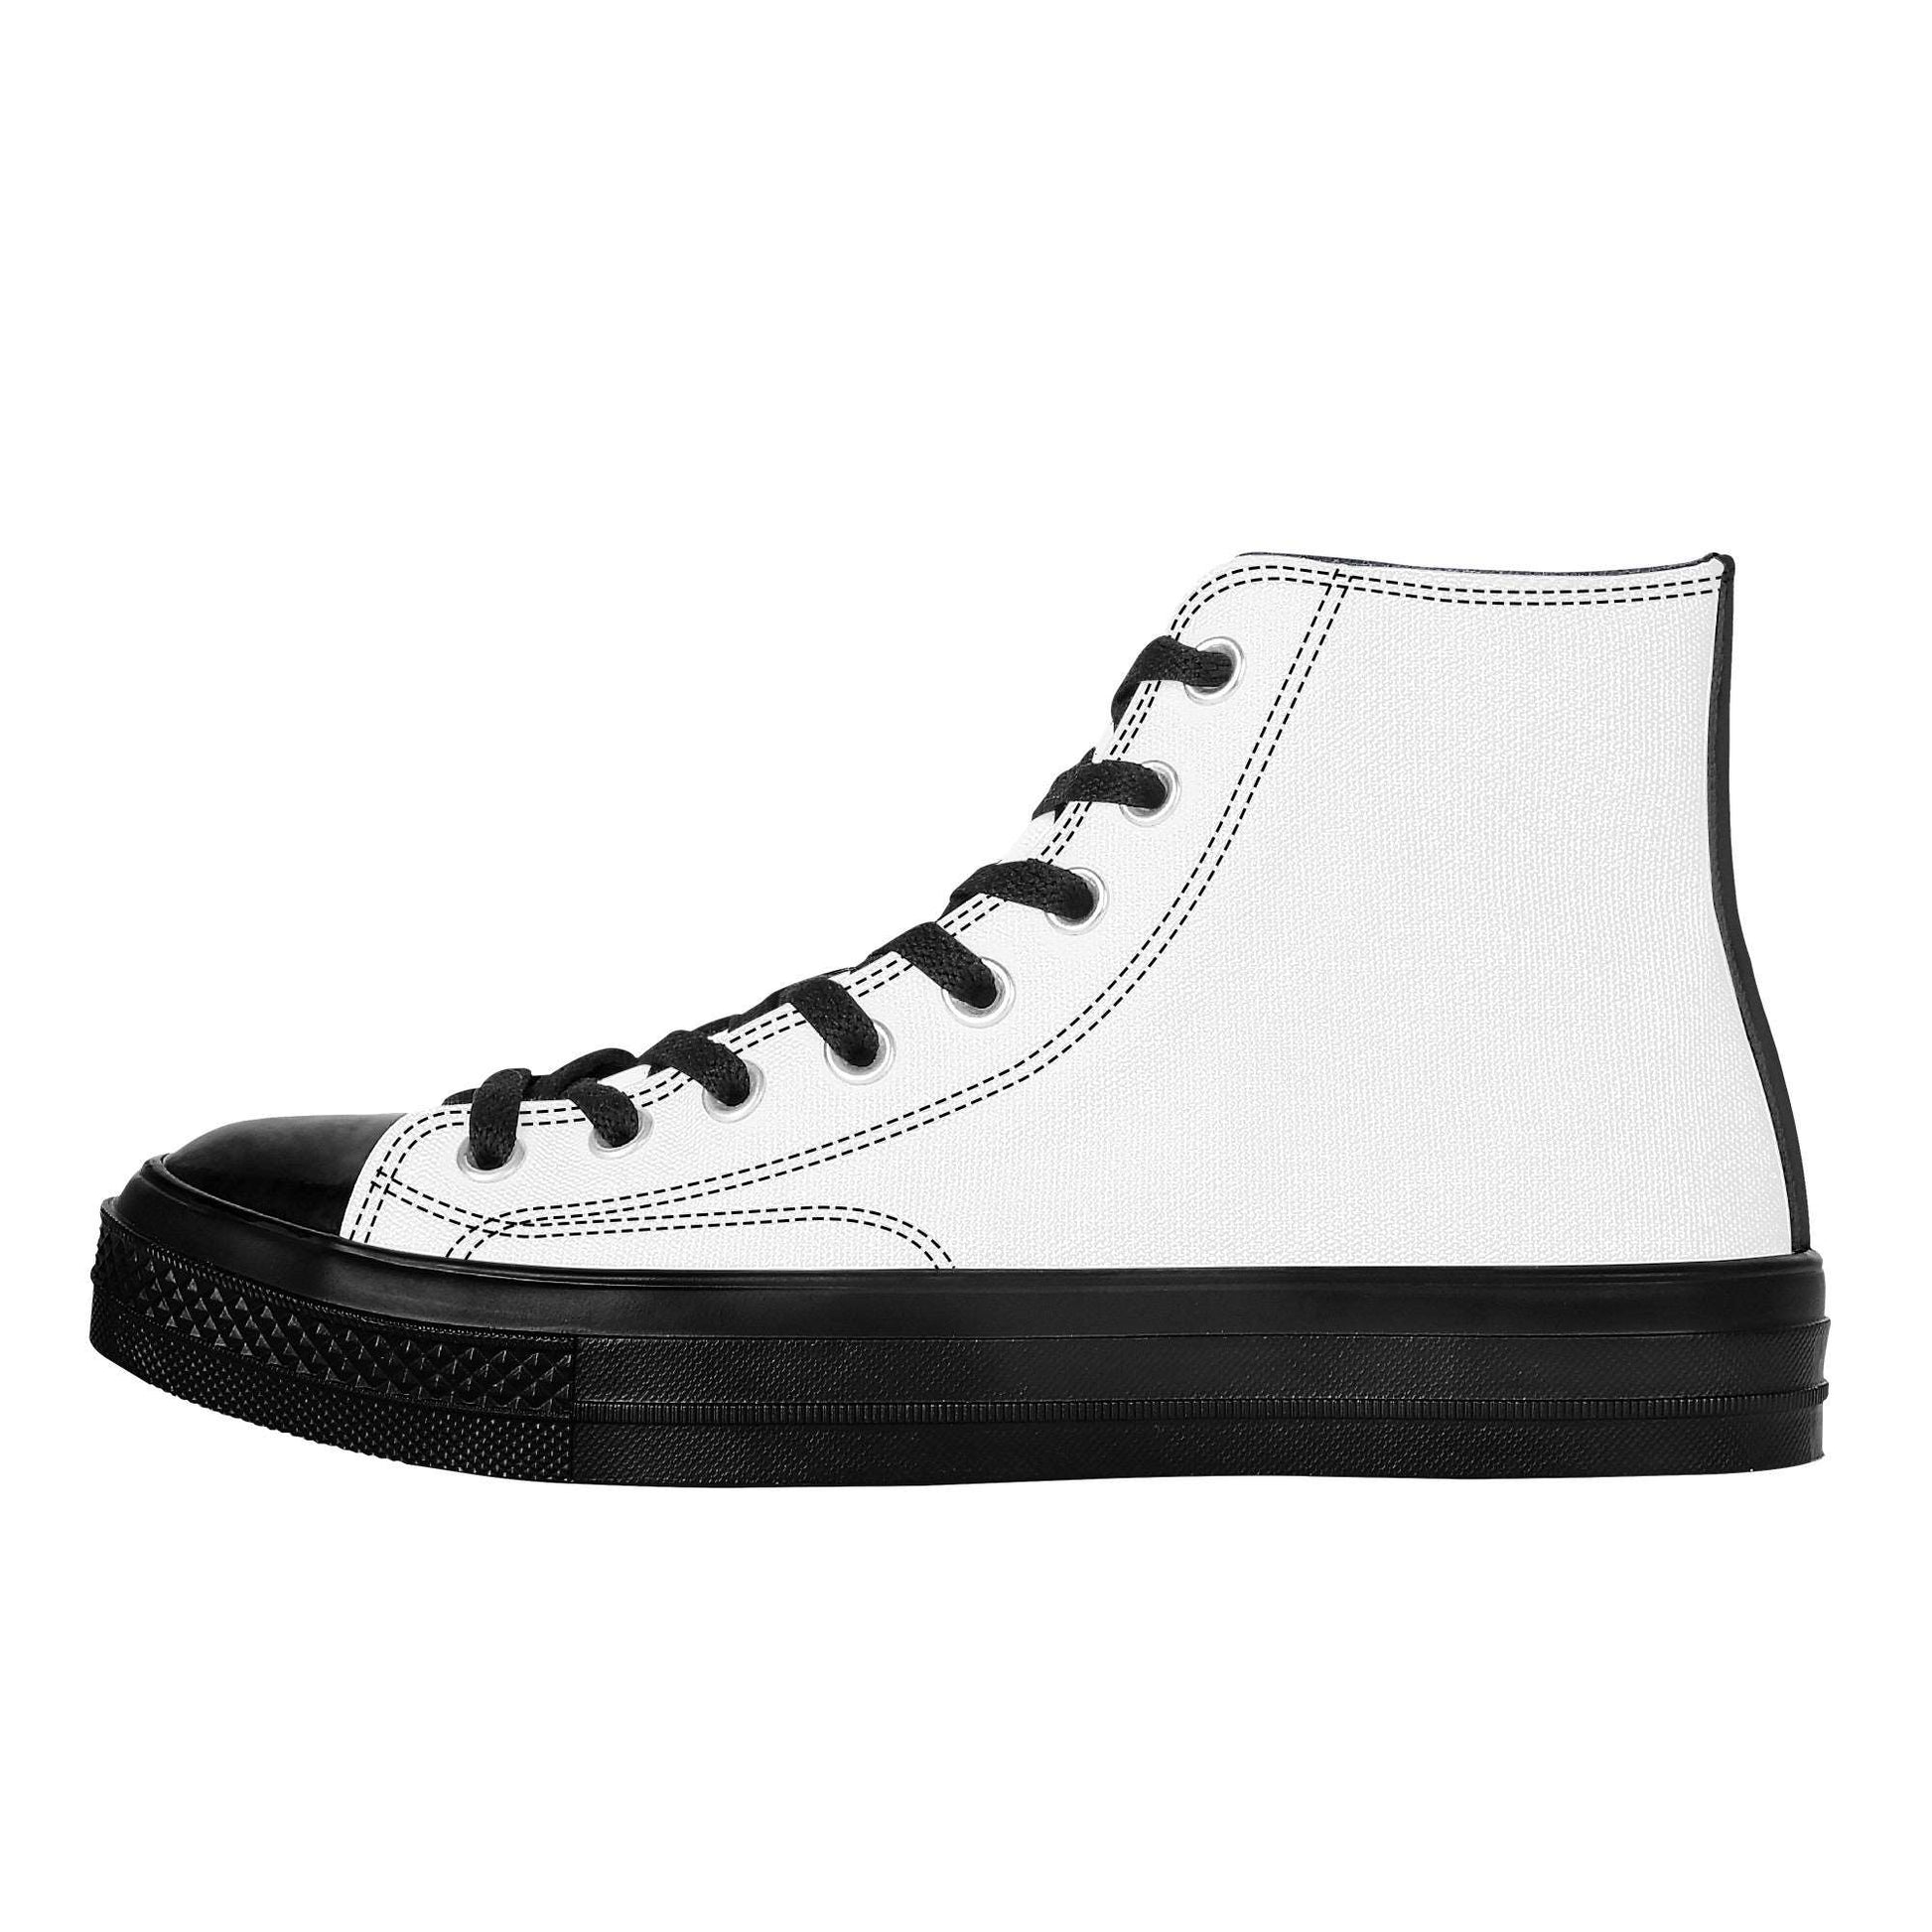 Create Your Own - High Top Canvas Shoes - Black